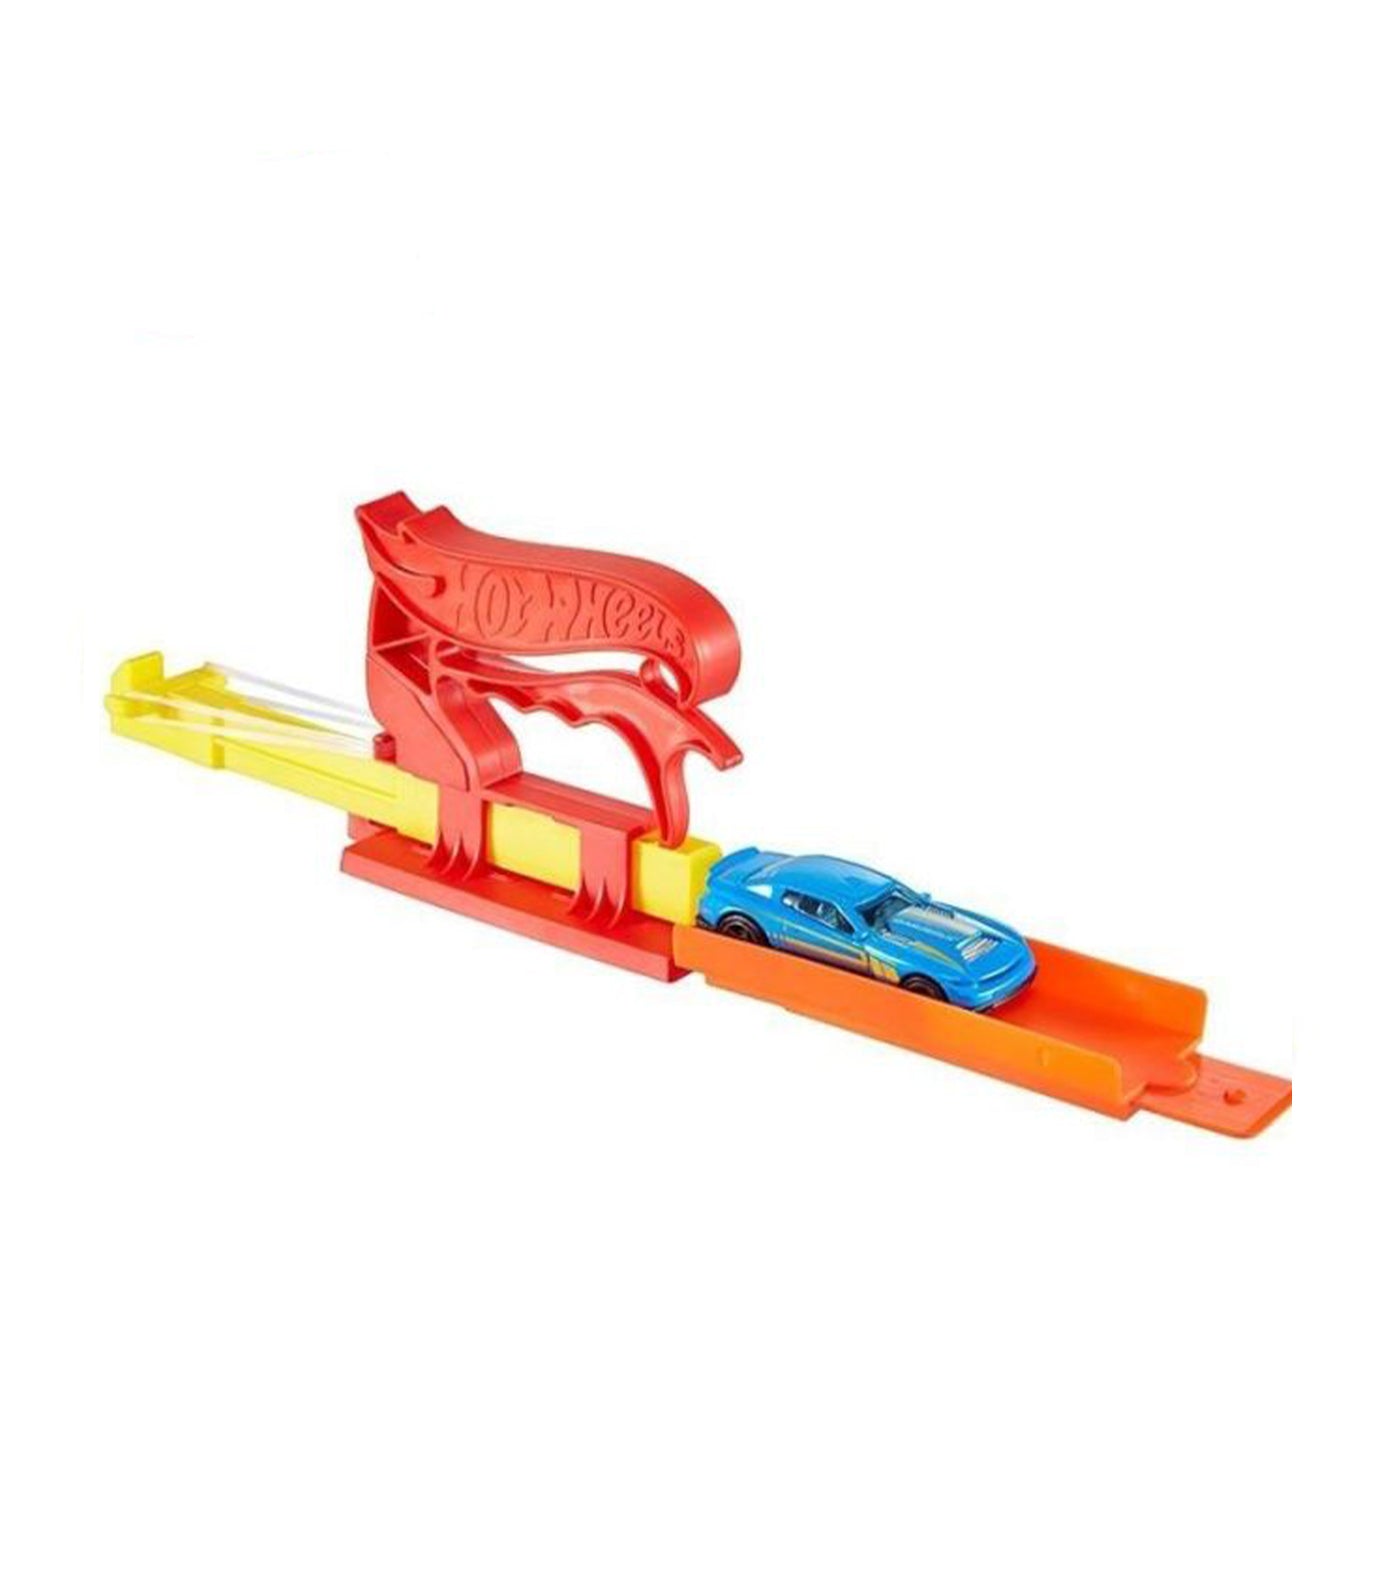 hot wheels pocket launcher - red